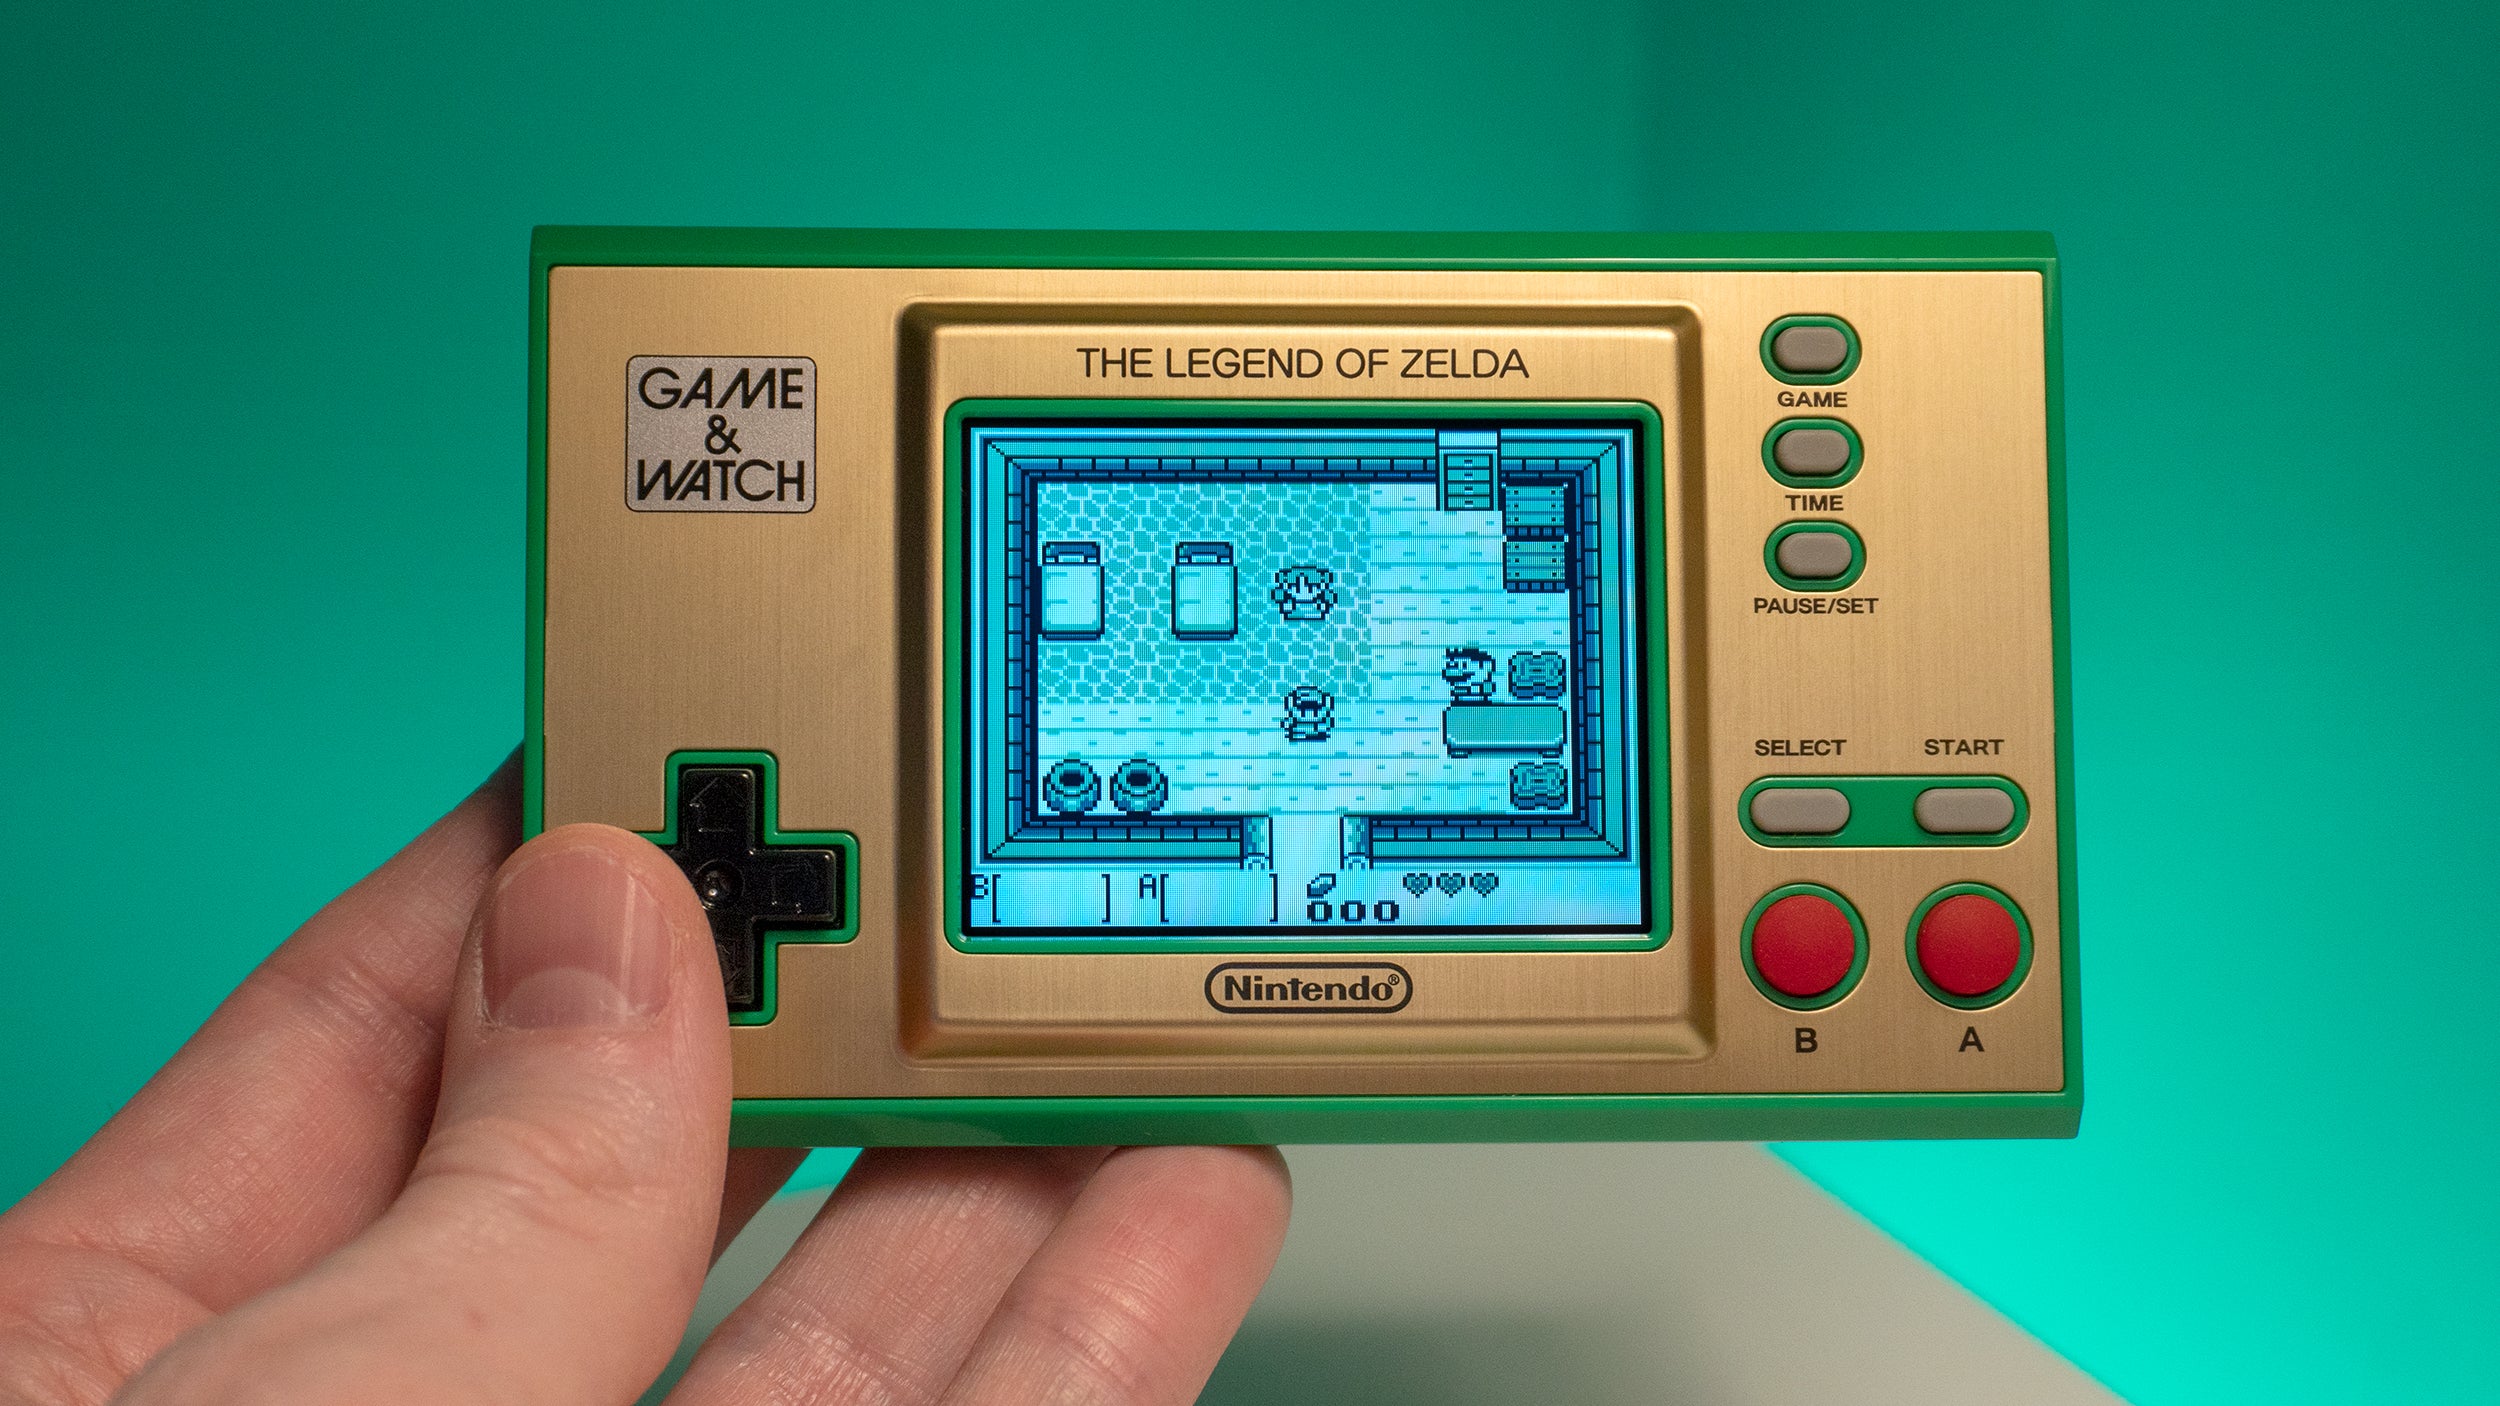 The best The Legend of Zelda game of all time. Prove me wrong. (Photo: Andrew Liszewski - Gizmodo)